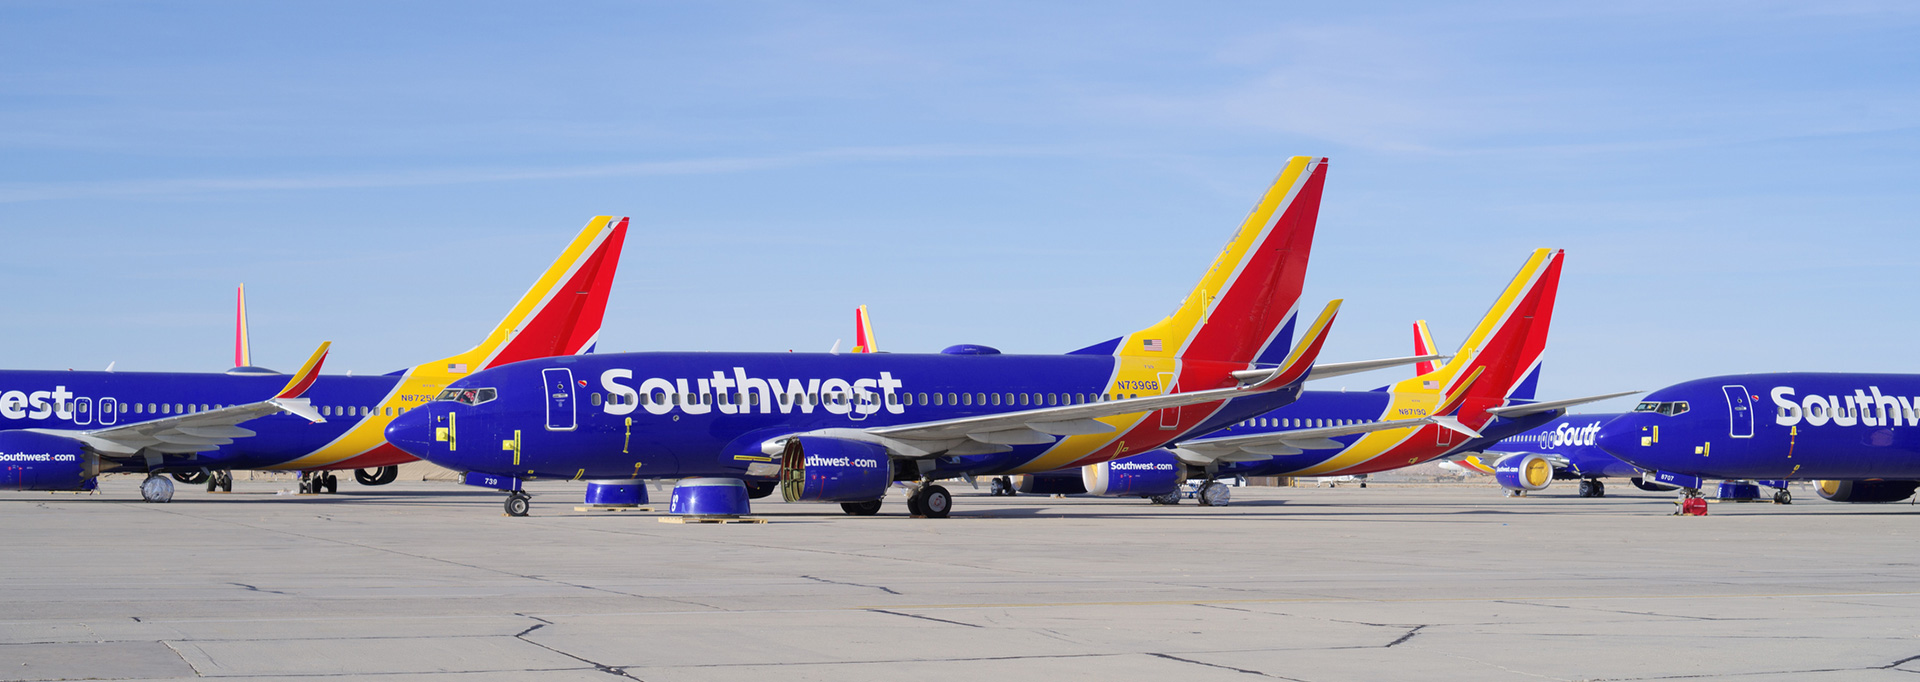 Southwest planes at airport